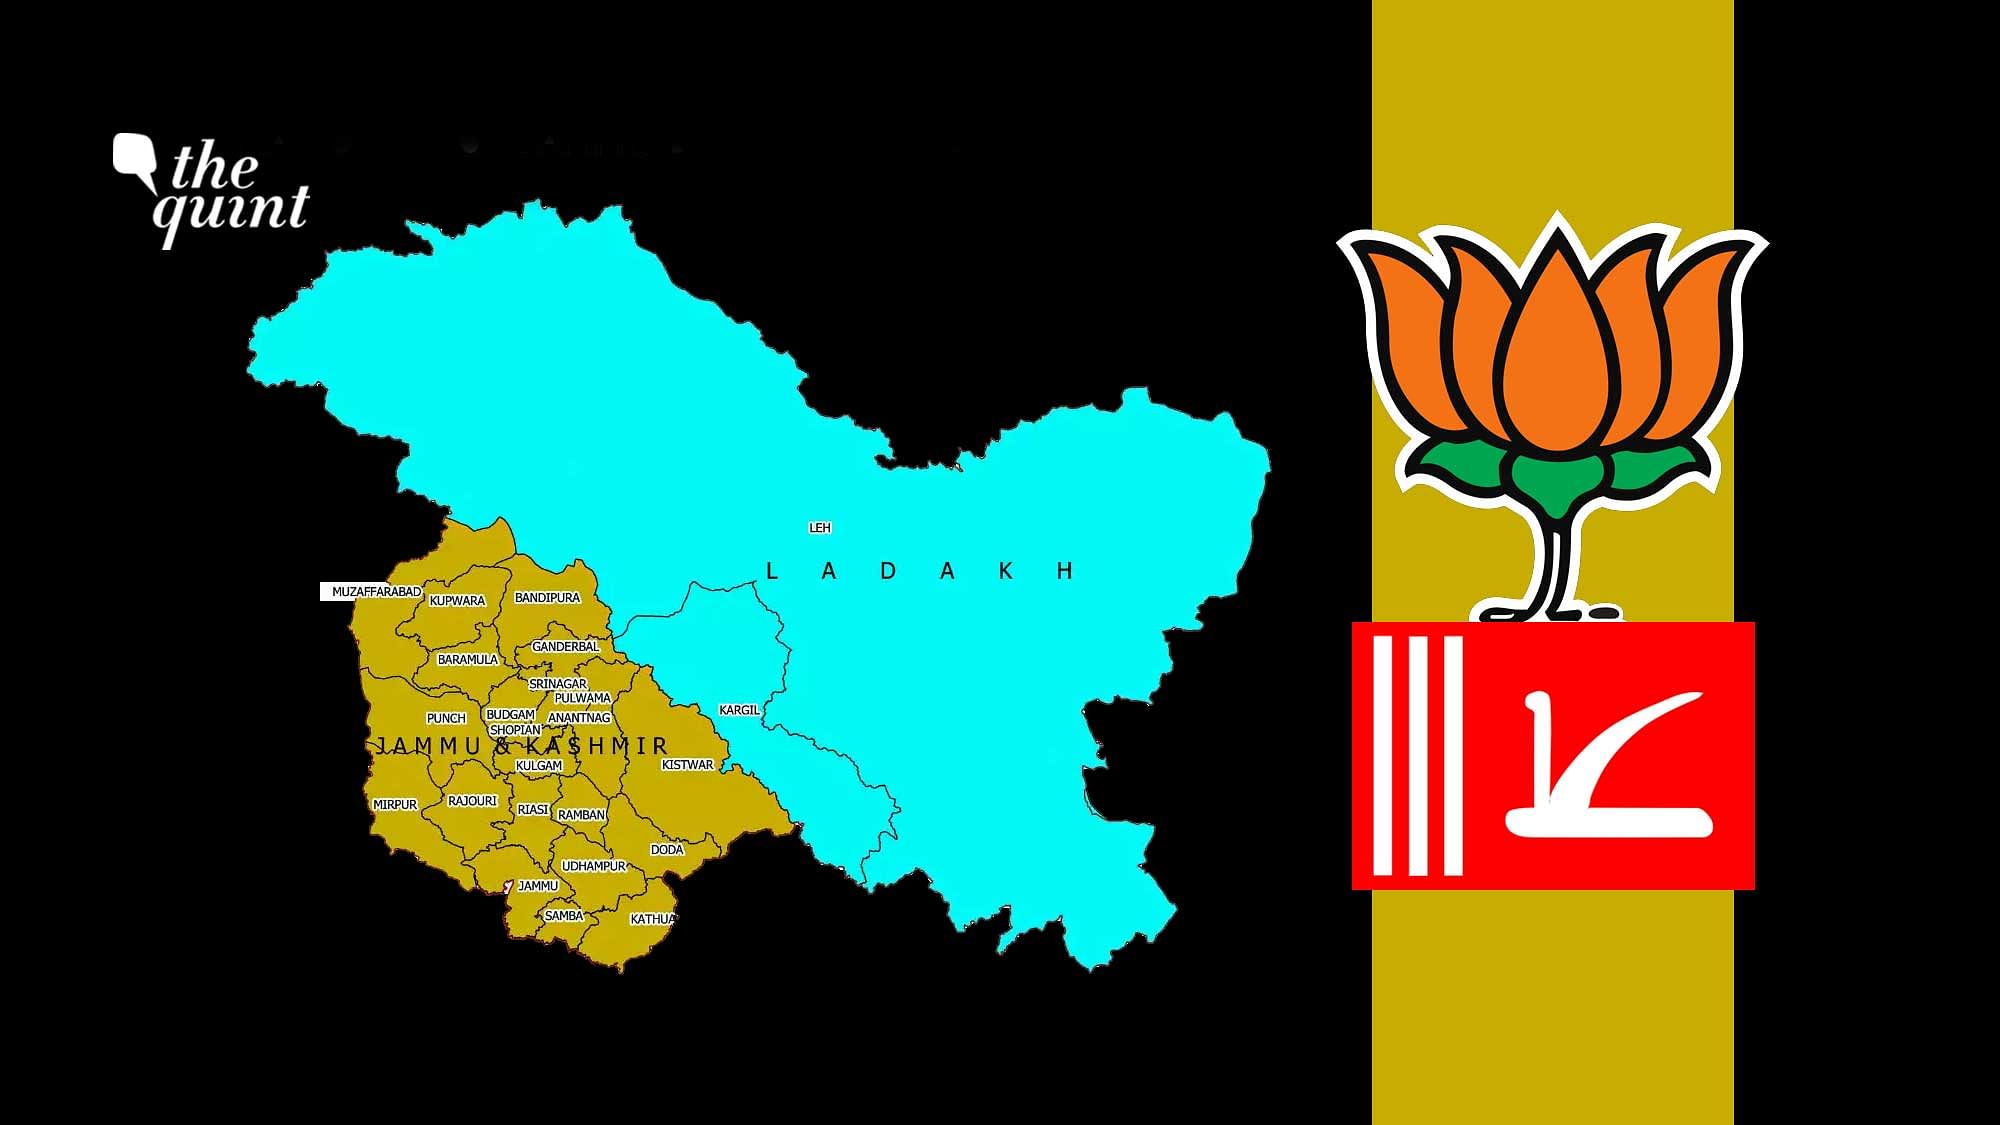 The Gupkar alliance was the clear winner in the Valley, while the BJP maintained its dominance in the Jammu region in the DDC polls.